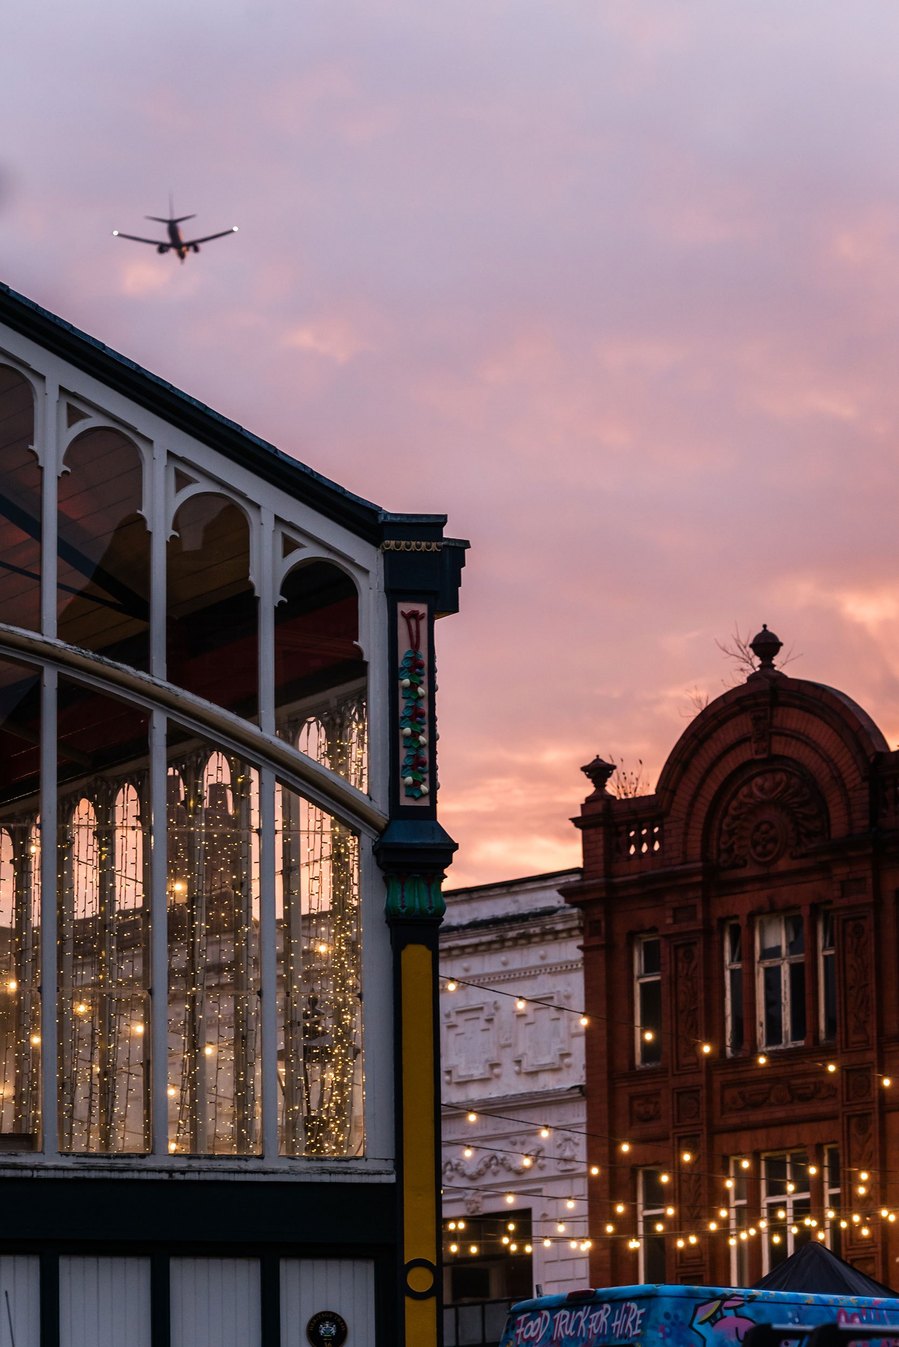 stockport lifestyle and placemaking photography, local street architecture, evening light, airplane in sky